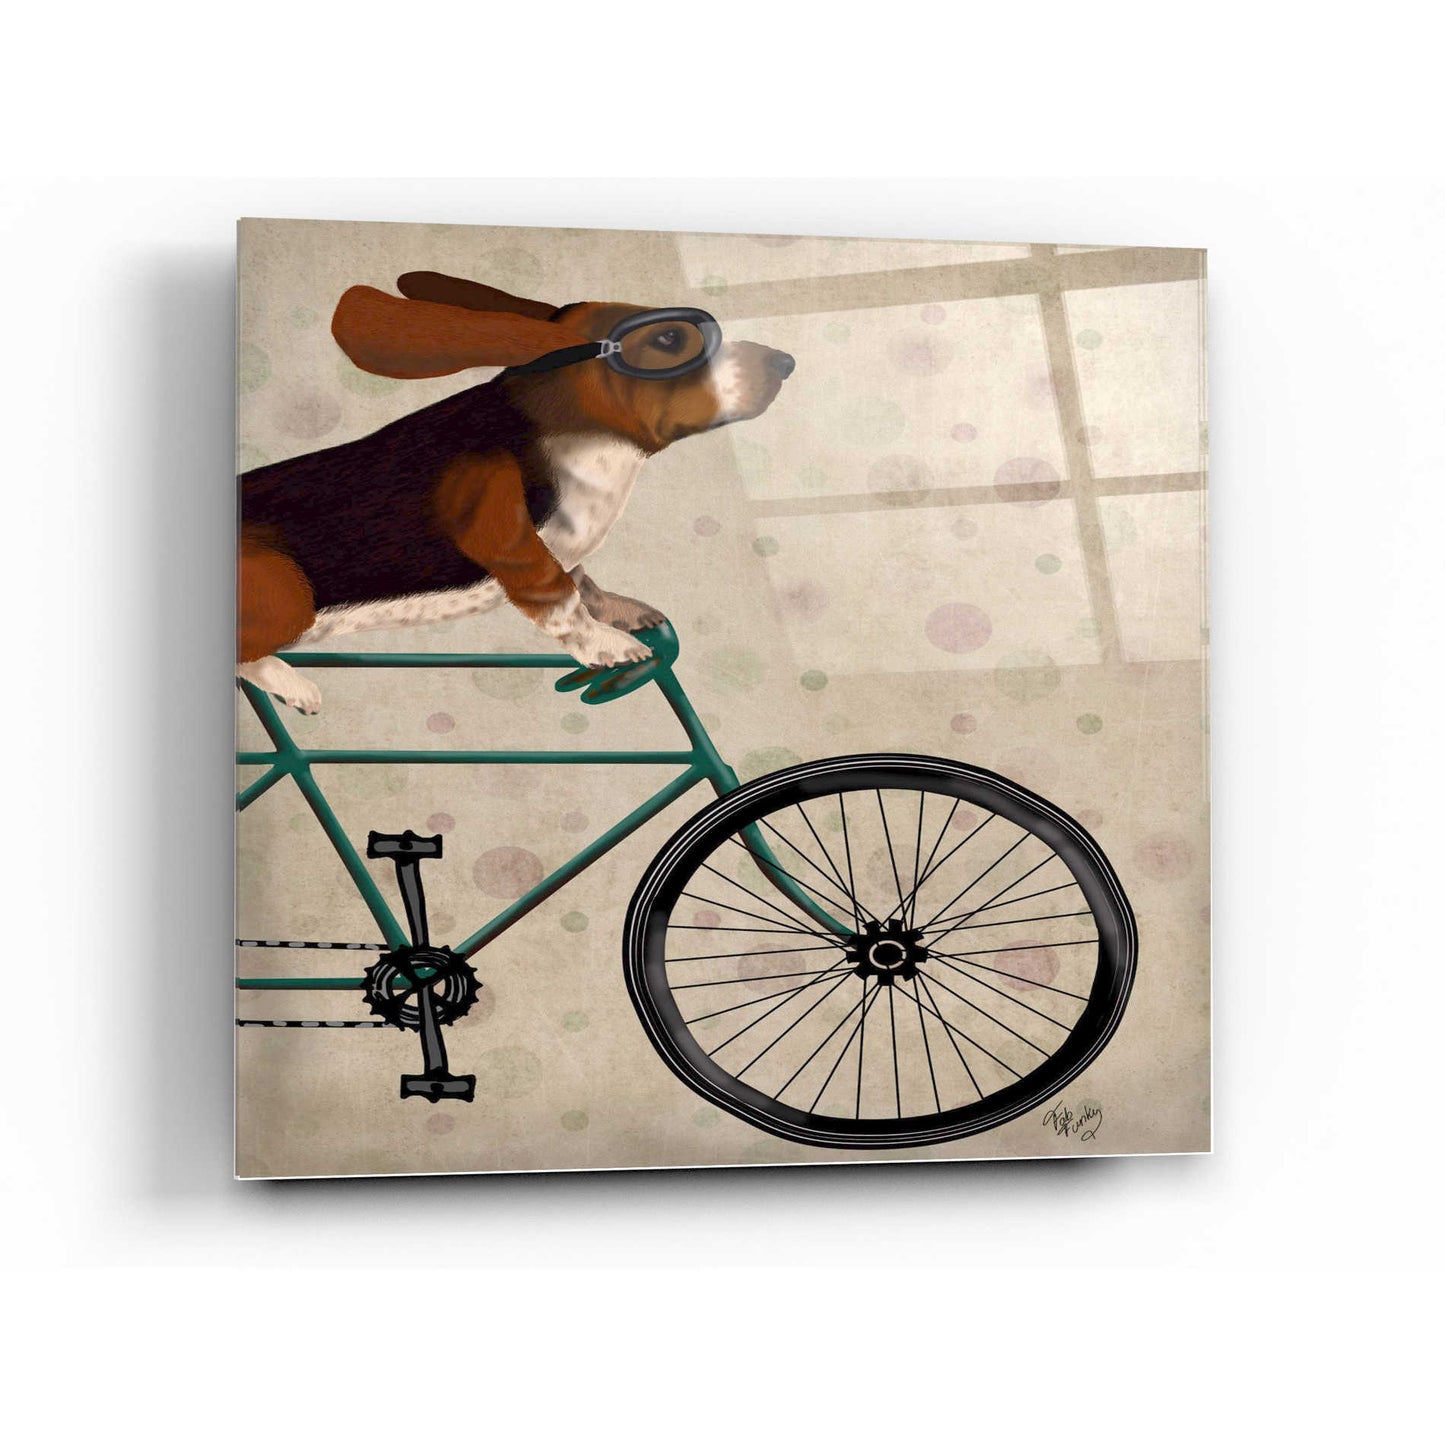 Epic Art 'Basset Hound on Bicycle' by Fab Funky Acrylic Glass Wall Art,24x24